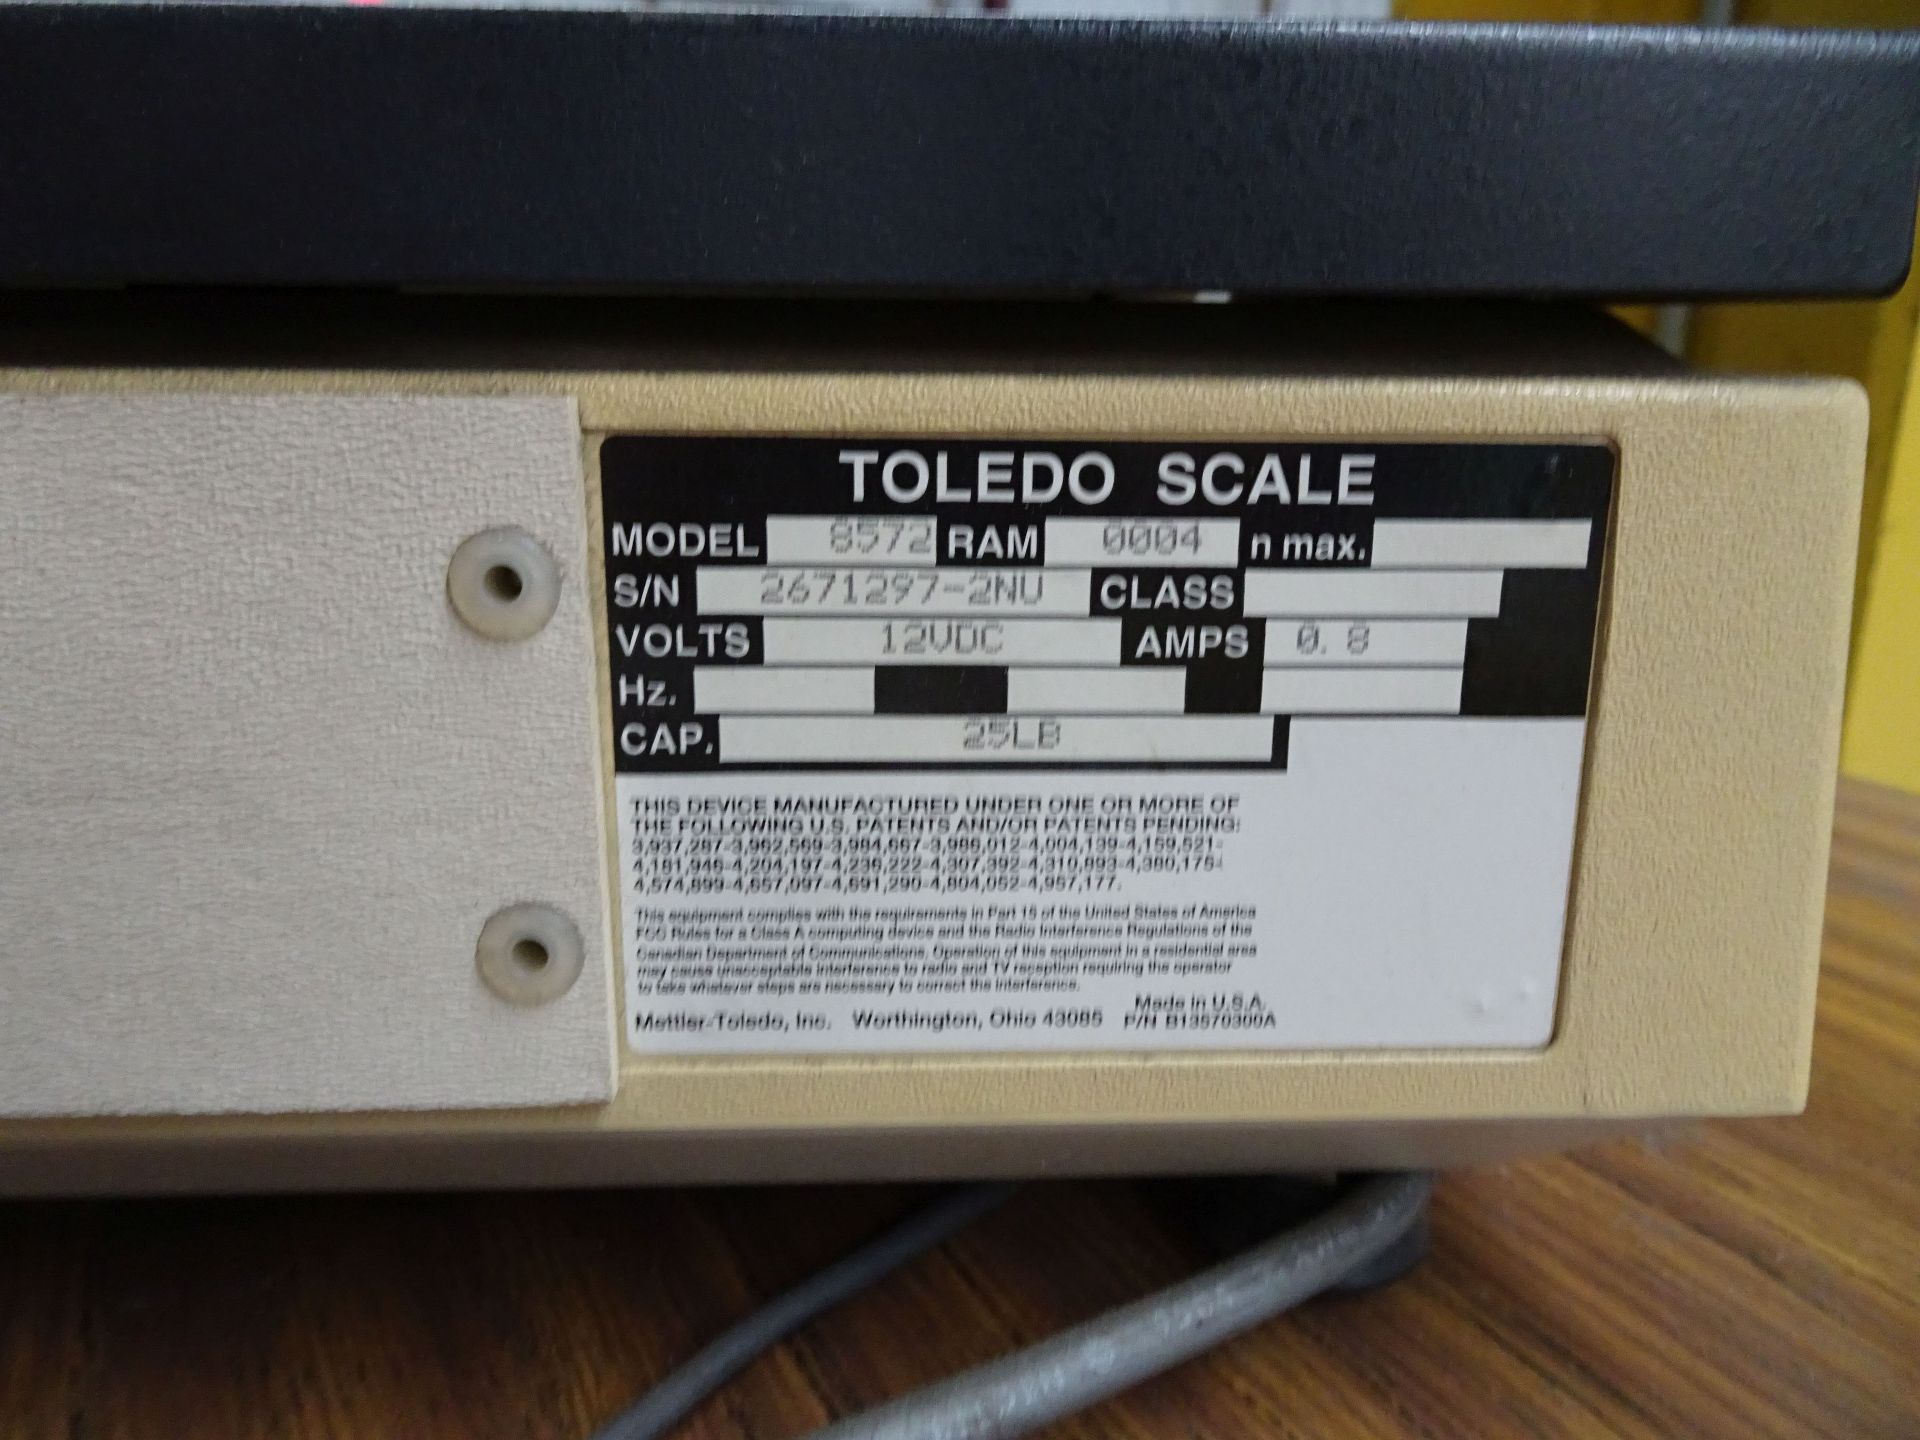 5,000 LB. (APPROX.) WEIGH PLATE FLOOR TYPE PLATFORM SCALE WITH TOLEDO ELECTRONIC READ OUT AND - Image 3 of 4